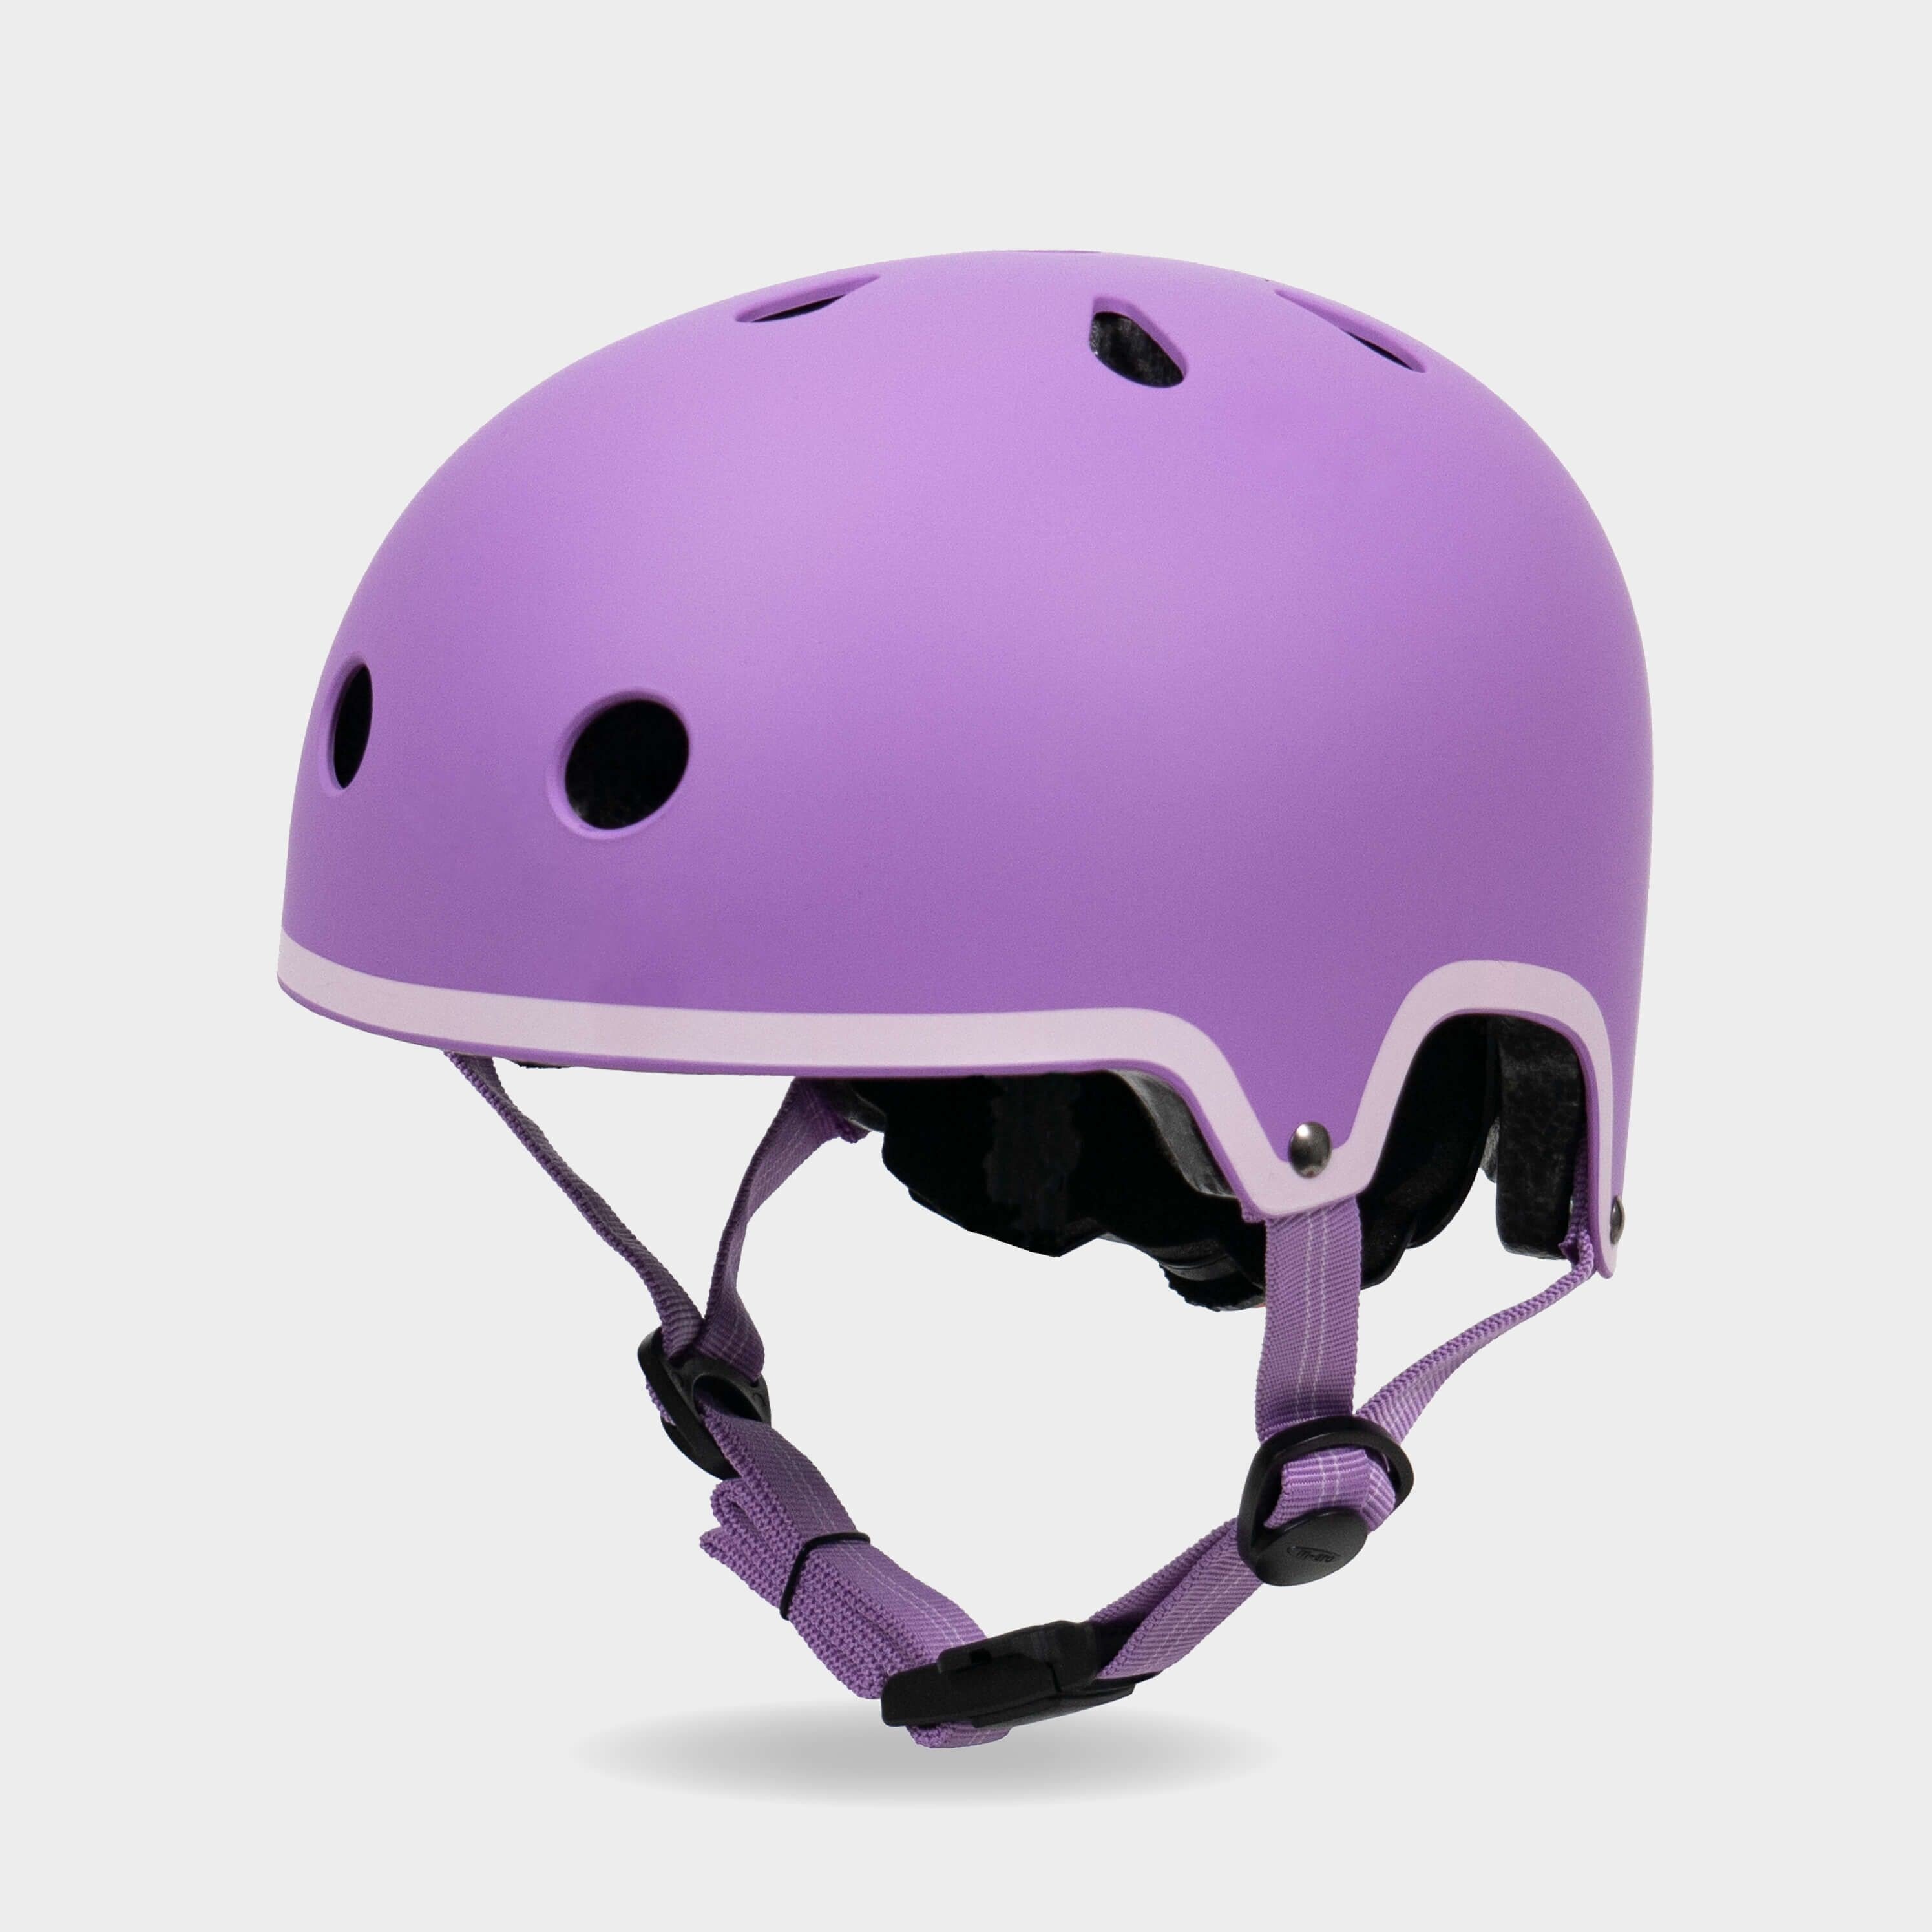 Micro Scooters PURPLE DELUXE HELMET SMALL Child Protective Gear BNIP 